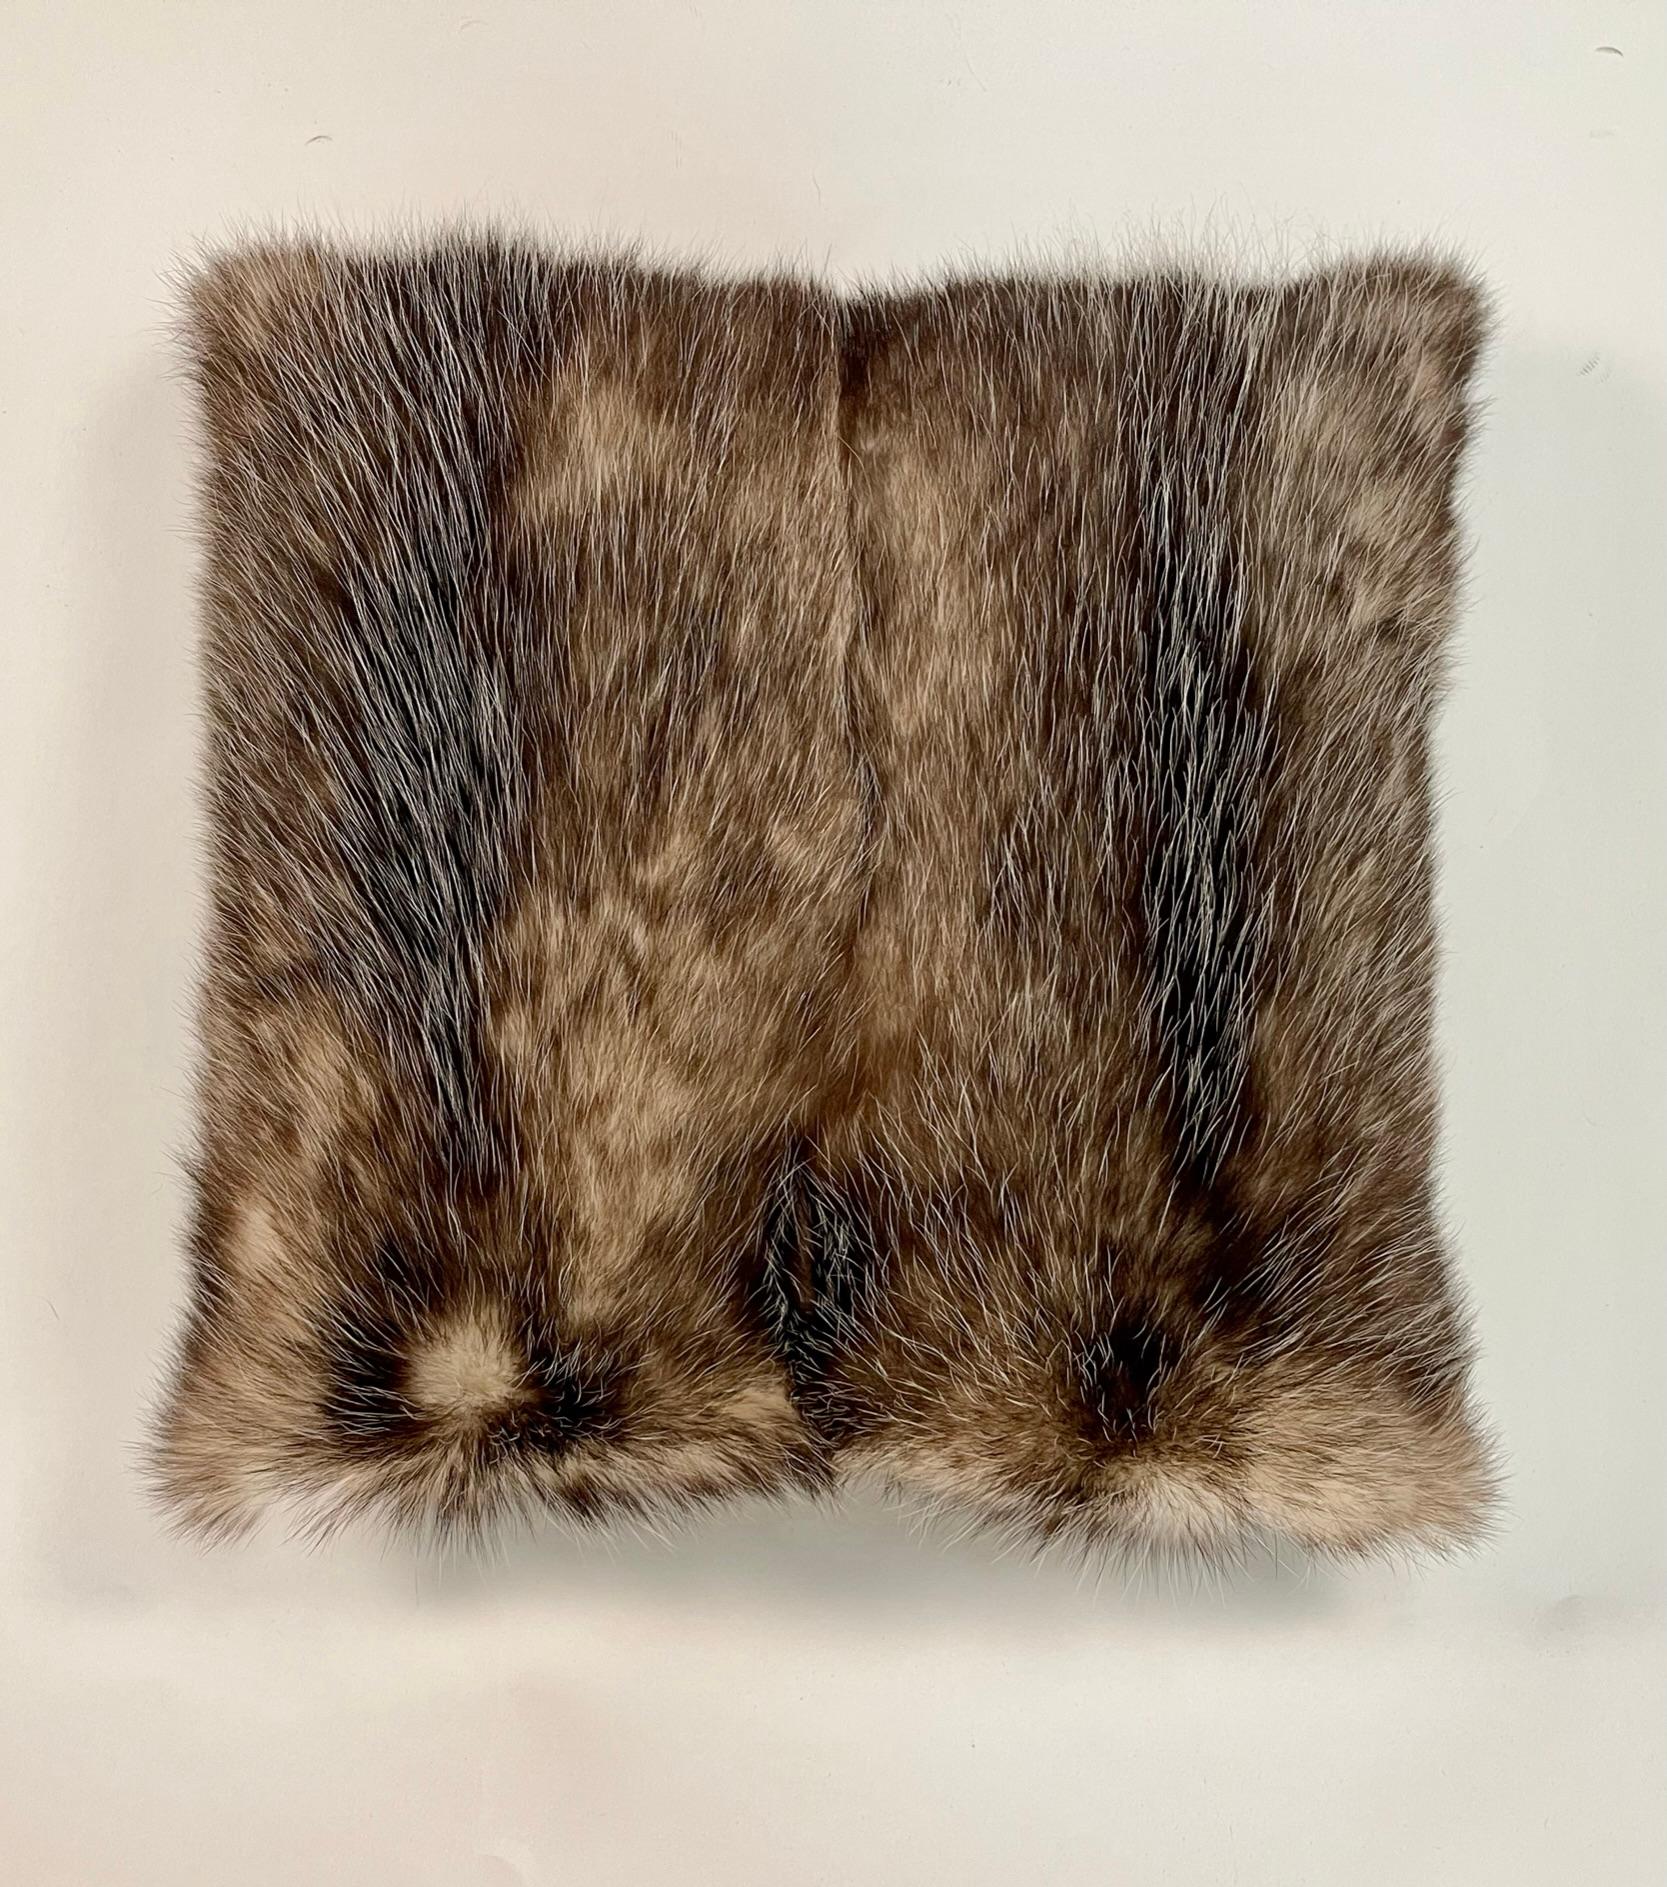 Exclusive home accessory, custom made by order. There is not a piece same to another. The product you will receive may have differences with the product pictured as it is a natural material and no two will be exactly alike. Each fur fabric is